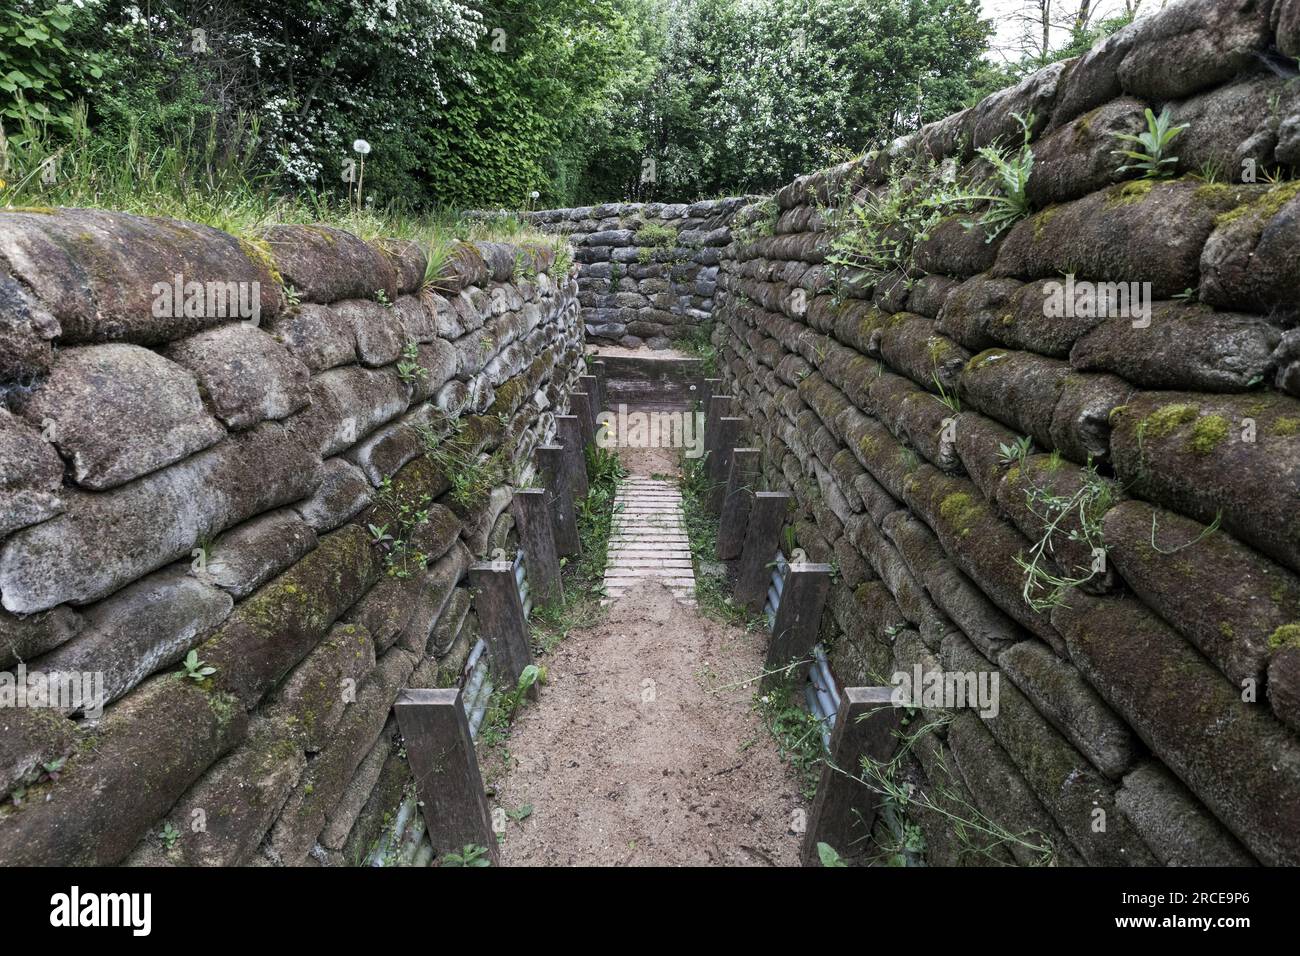 First World War Trenches, known as the Yorkshire Trenches, Ypres, Belgium, EU Stock Photo